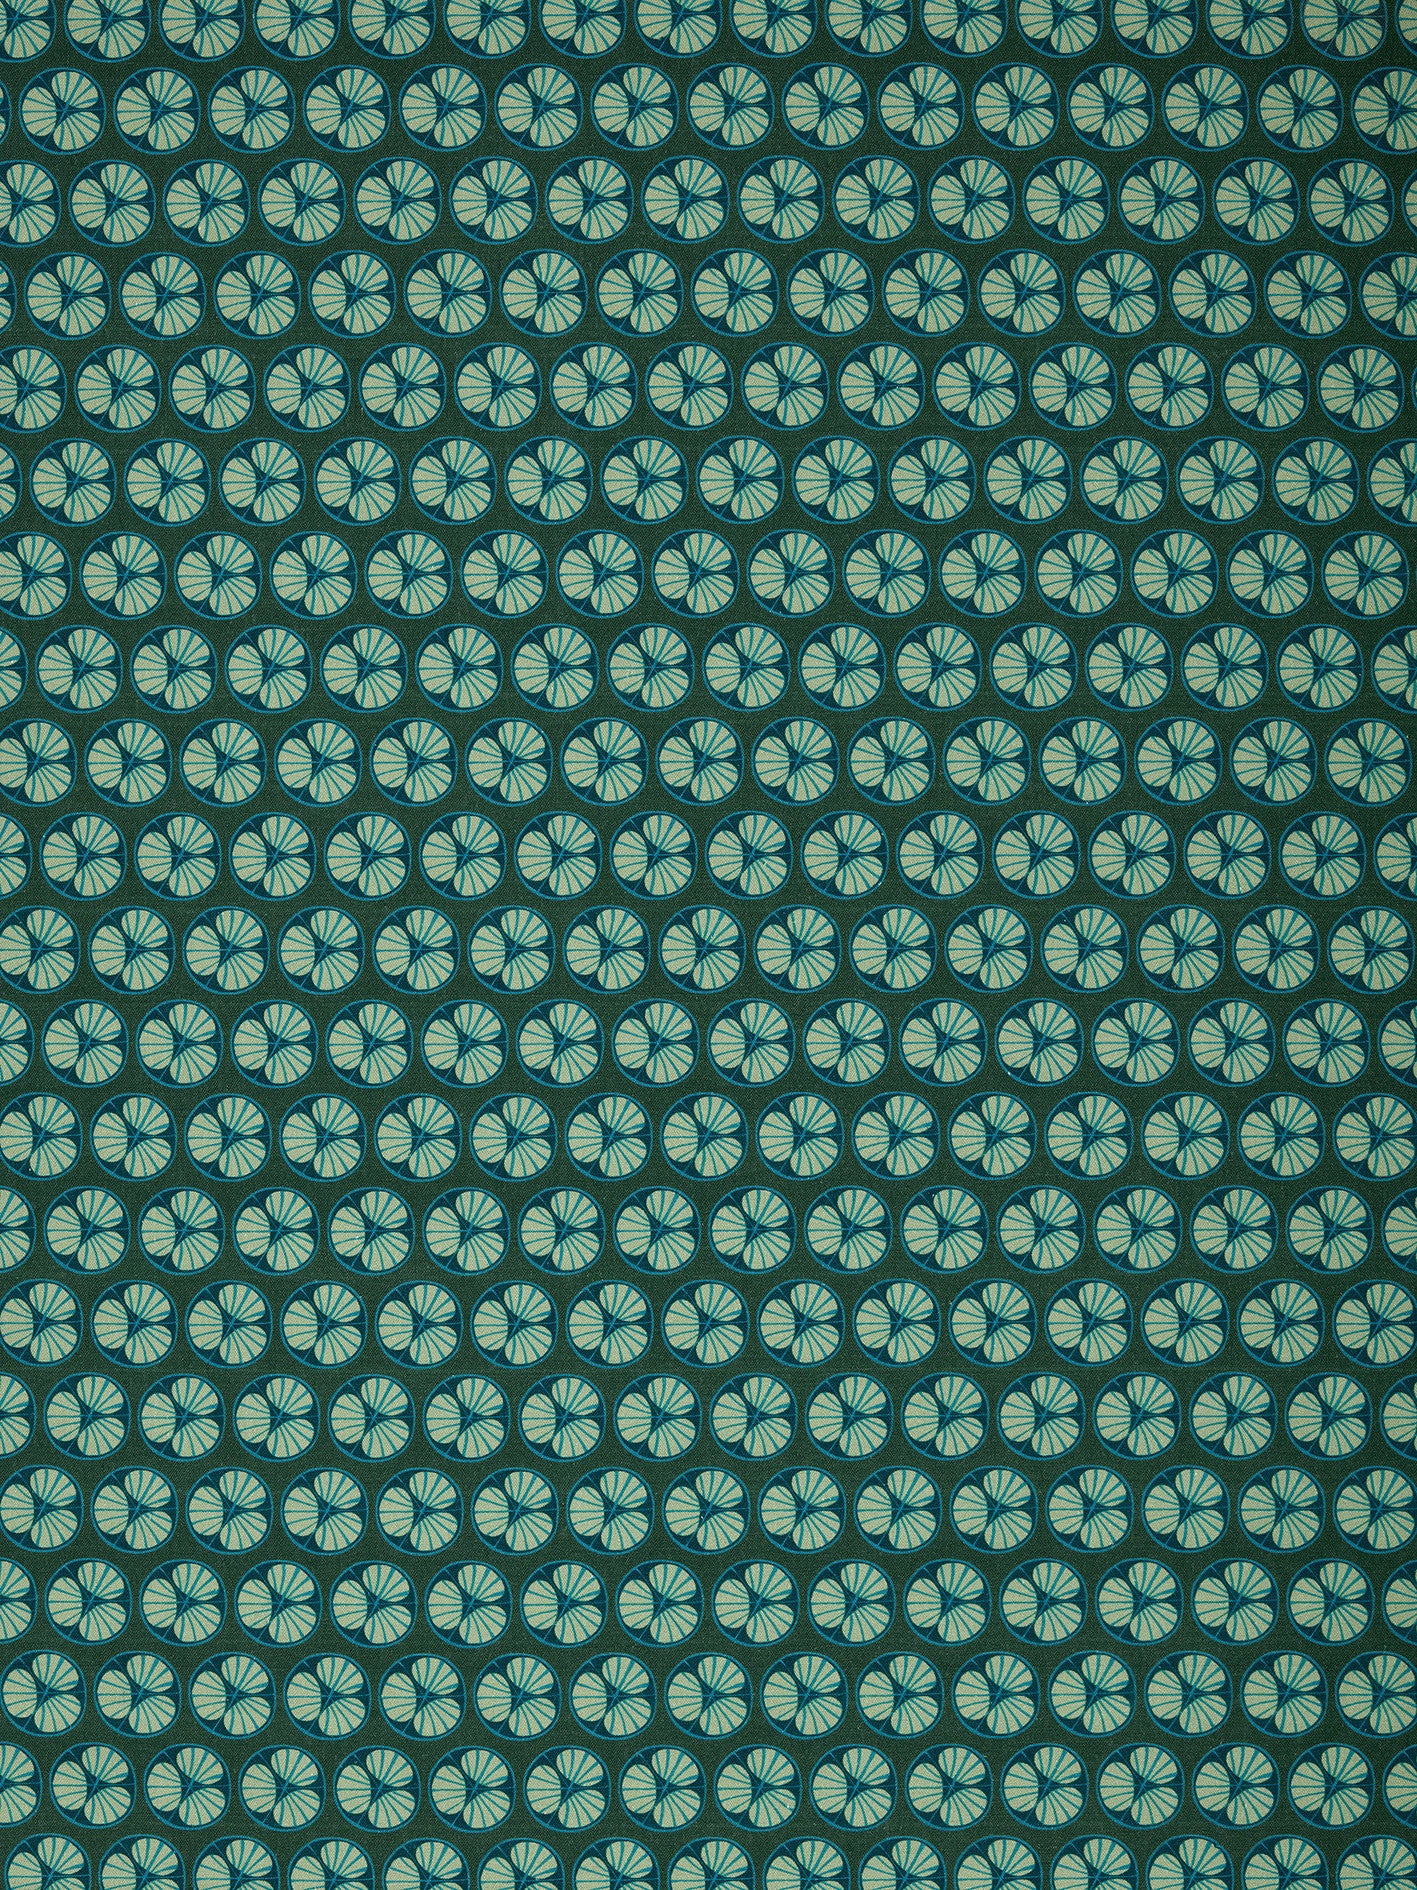 Graphic Cross Section of Fruit Pattern Printed Linen Cotton Canvas Fabric in Dark Moss Green